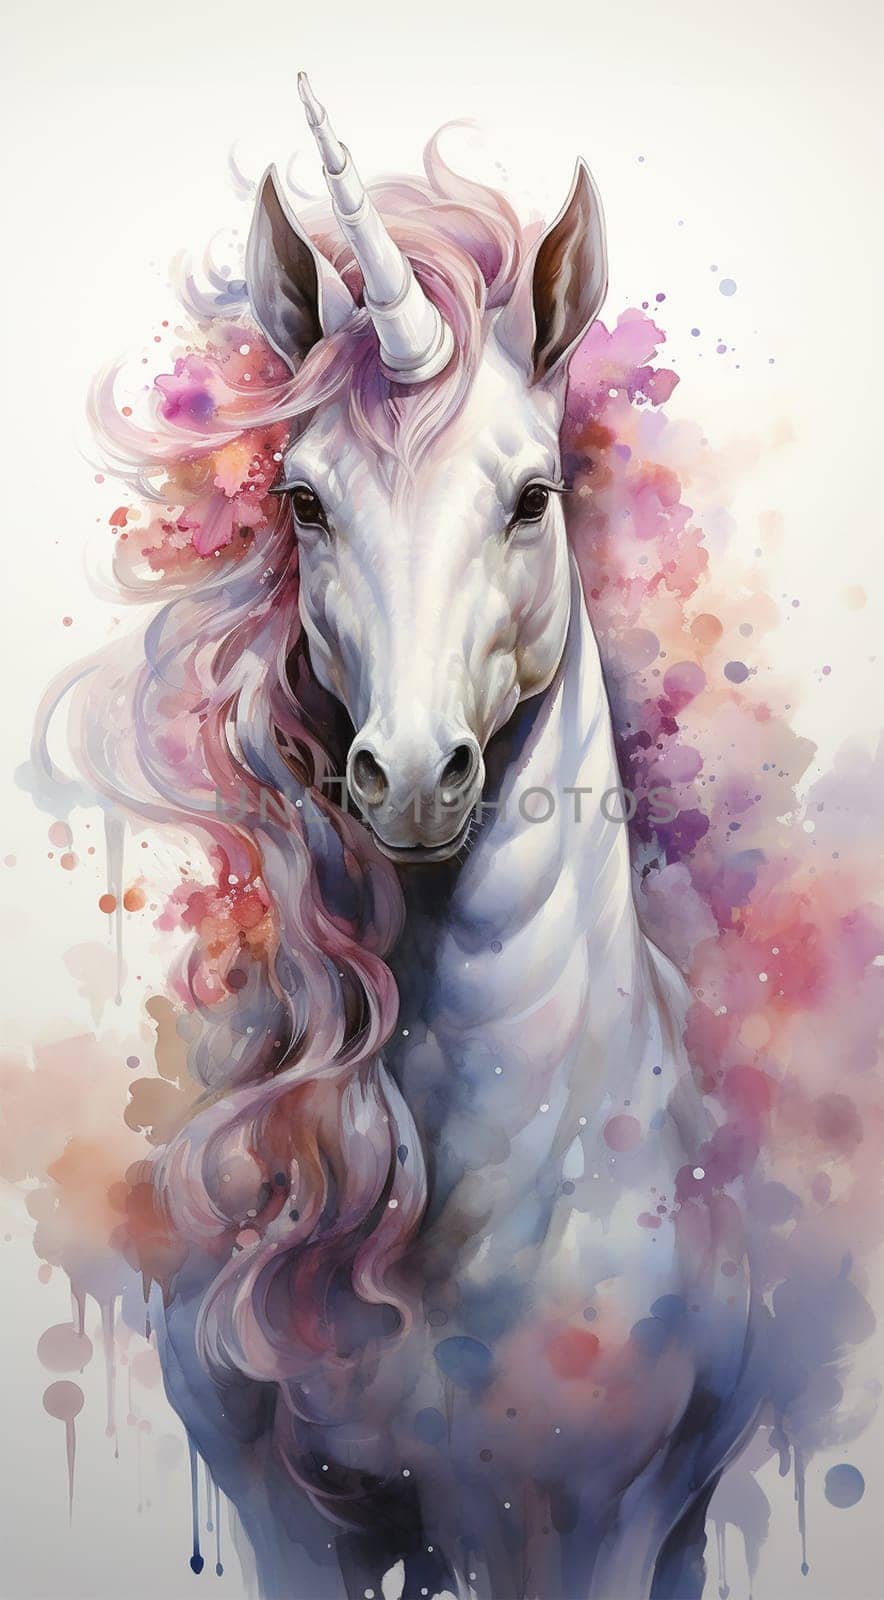 Magical cute unicorn pink fantasy background. Watercolor unicorn, magical unicorn pastel colored illustration white background. by Annebel146